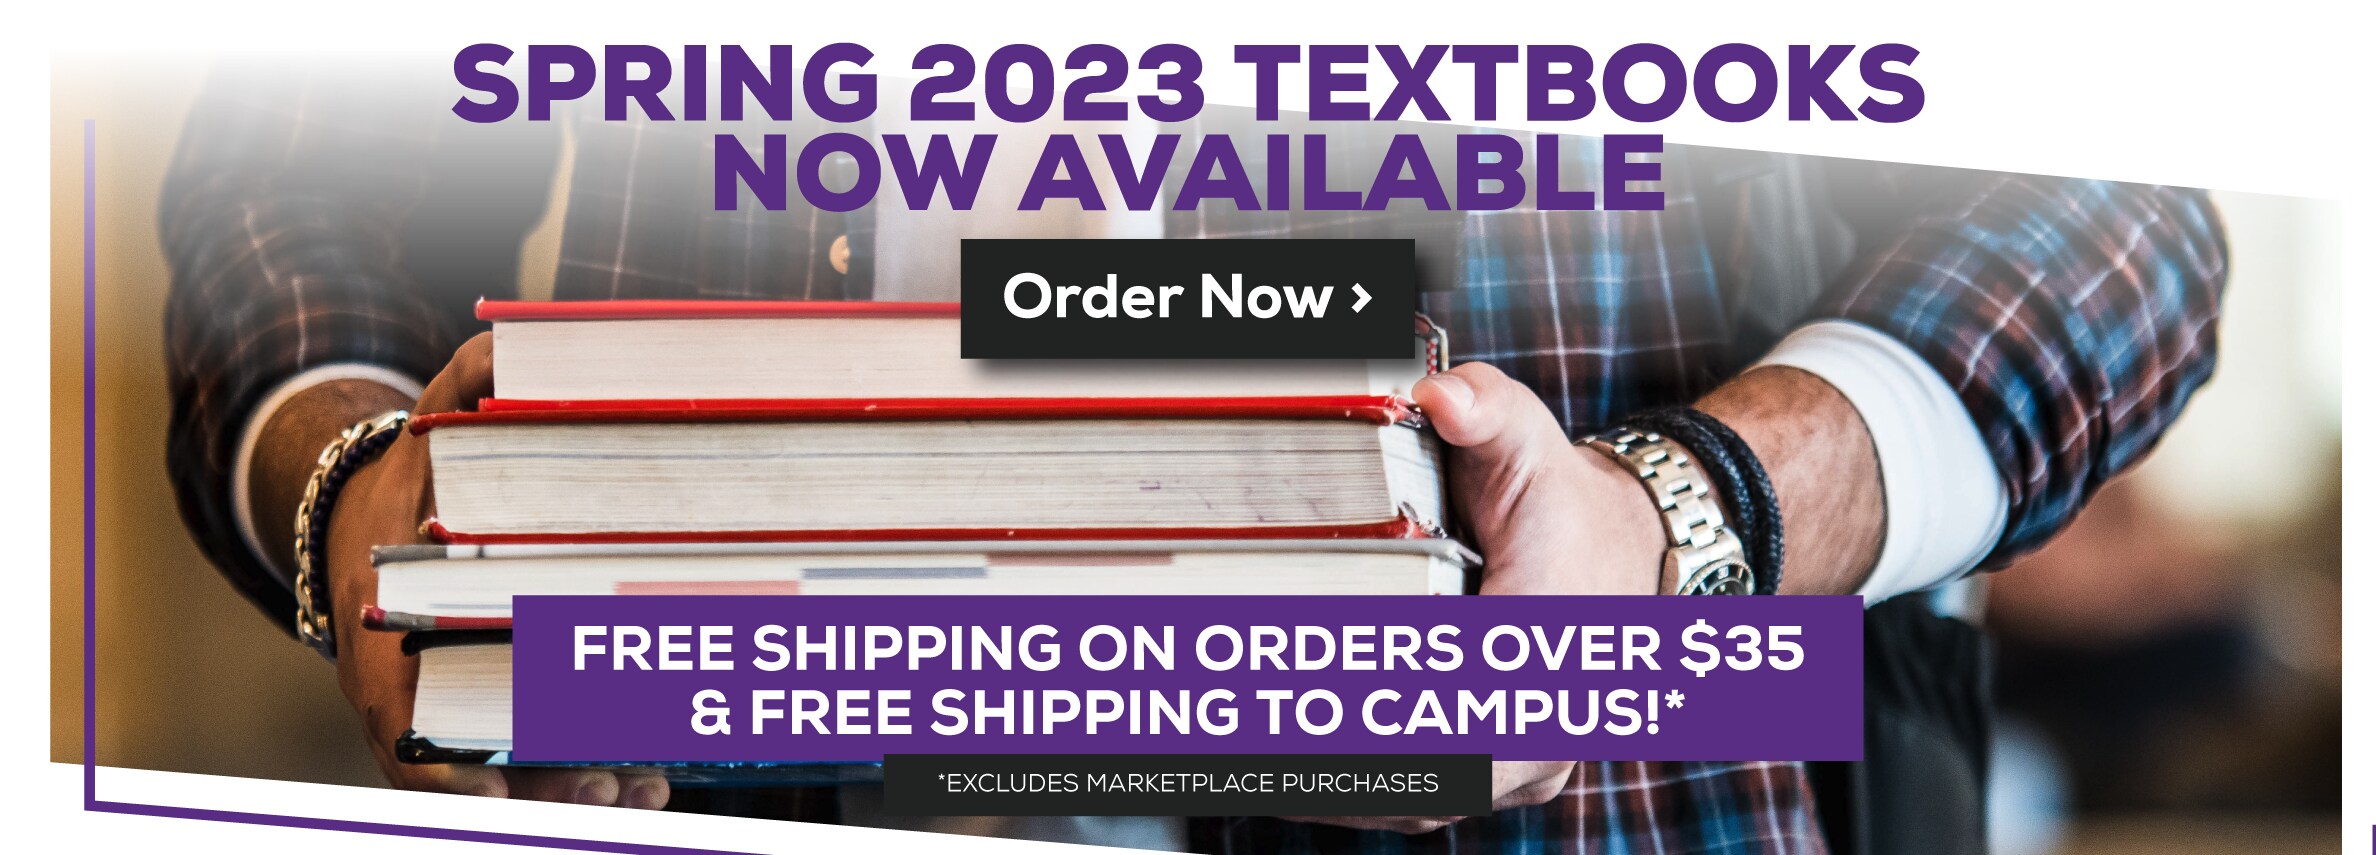 Spring 2023 Textbooks Now Available. Free shipping on all orders over $35 and free shipping to campus! Excludes marketplace purchases. Order Now.